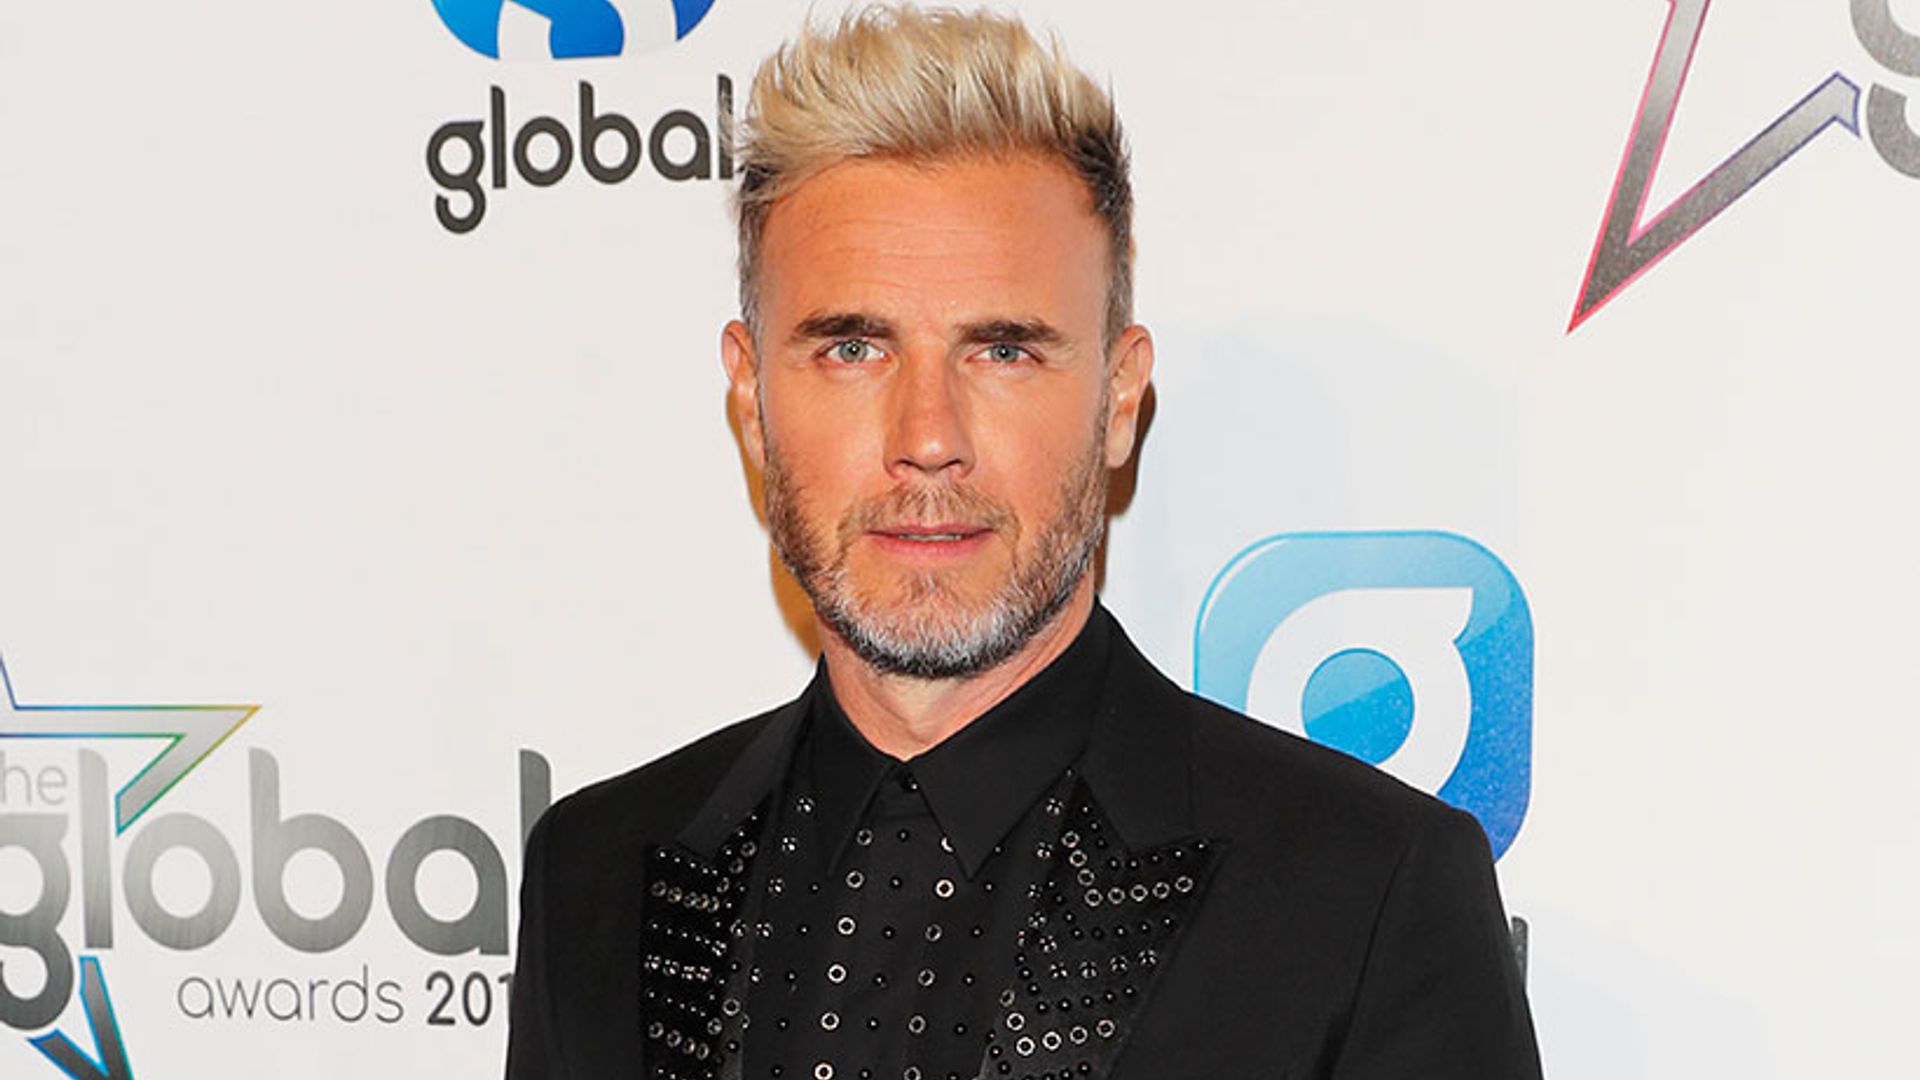 Gary Barlow pokes fun at 'role reversal' with son: 'My big friendly giant'